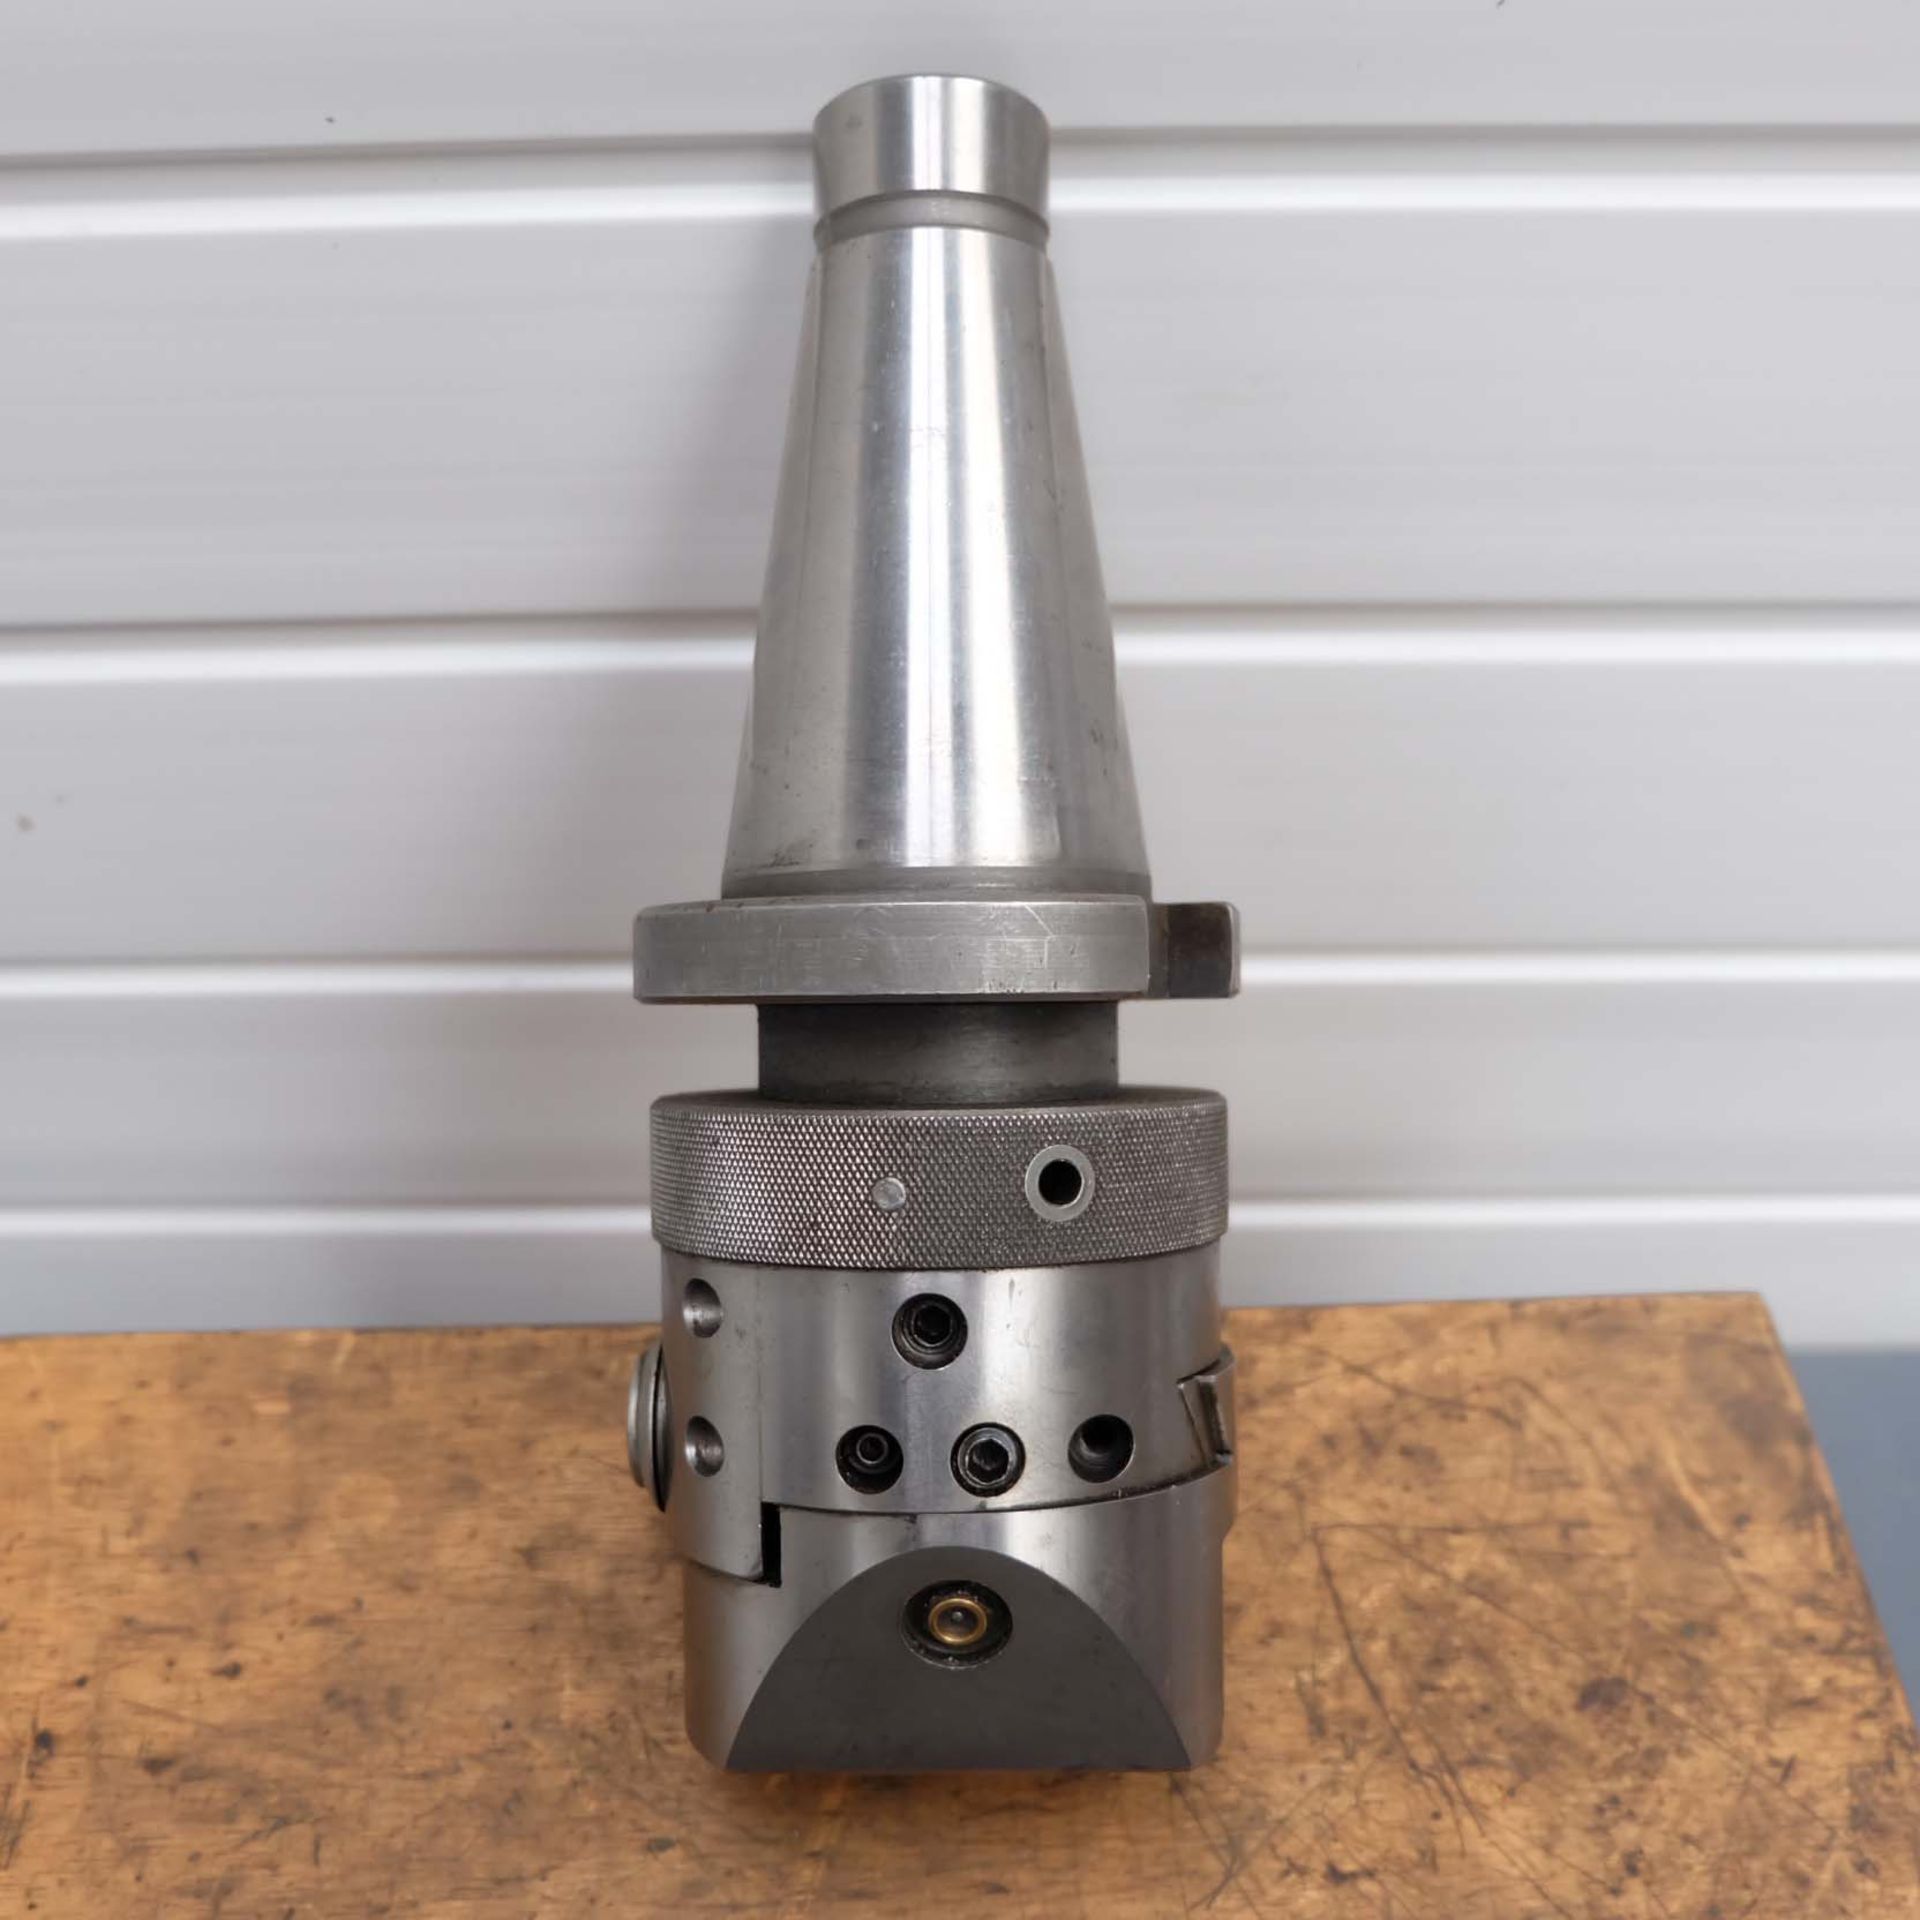 Boring & Facing Head. Head Size 3 1/2" Diameter. Spindle Taper 50 ISO x 1" Whit. Boring Bar Holes 3/ - Image 2 of 7